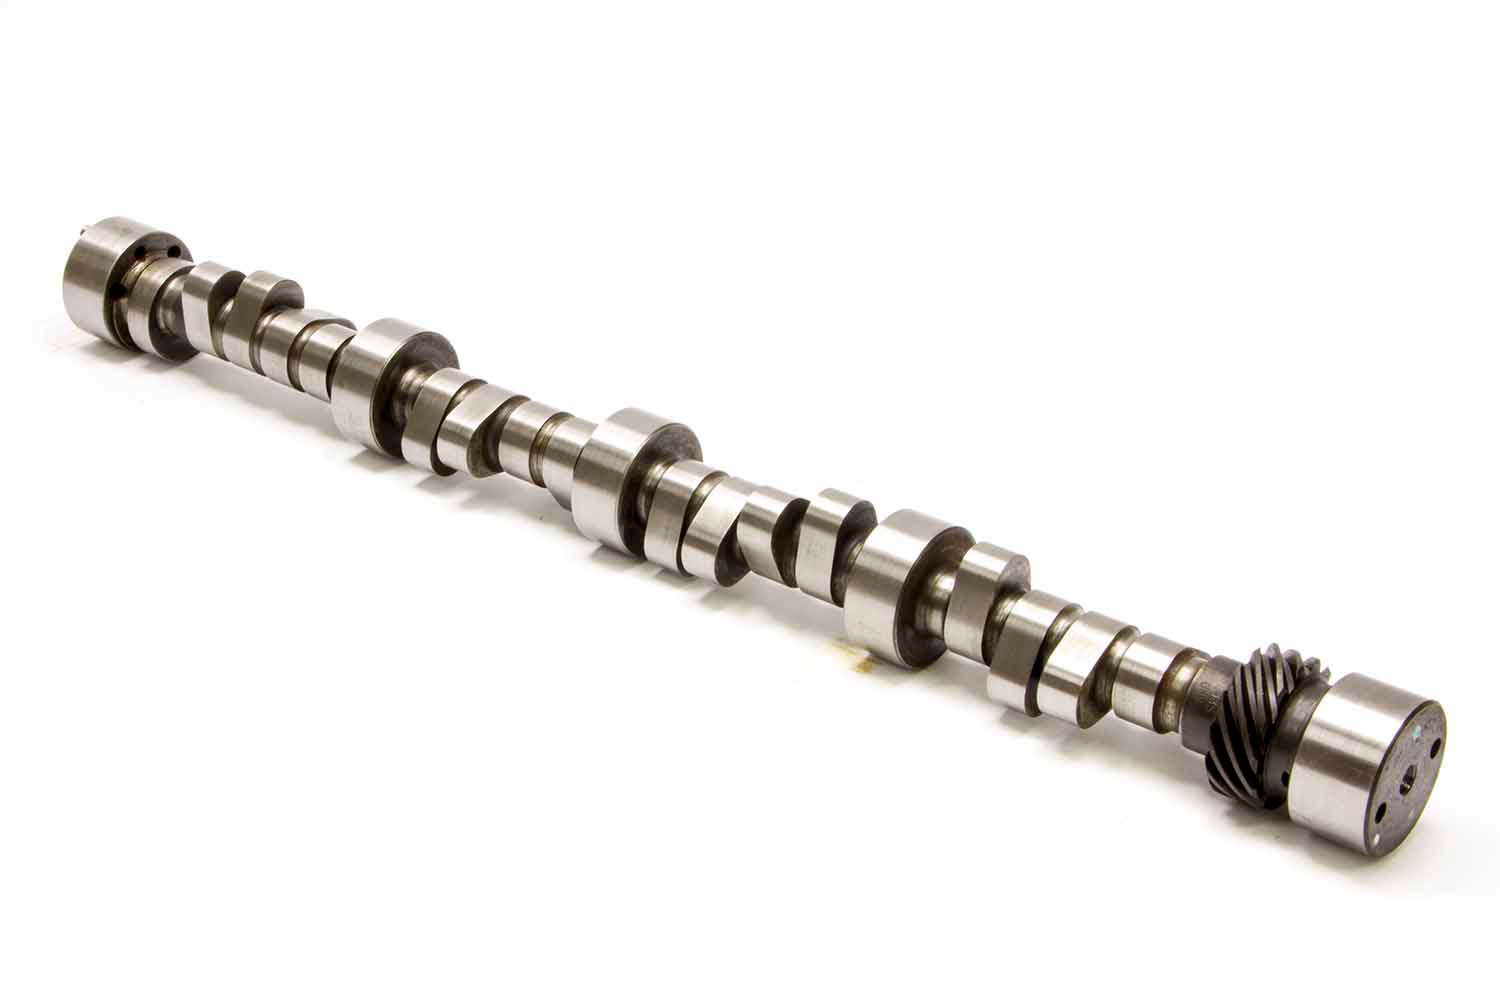 Lunati Cams 40120733 Camshaft, Voodoo, Mechanical Roller, Lift 0.585 / 0.600 in, Duration 279 / 285, 110 LSA, 2800 / 7200 RPM, Small Block Chevy, Each